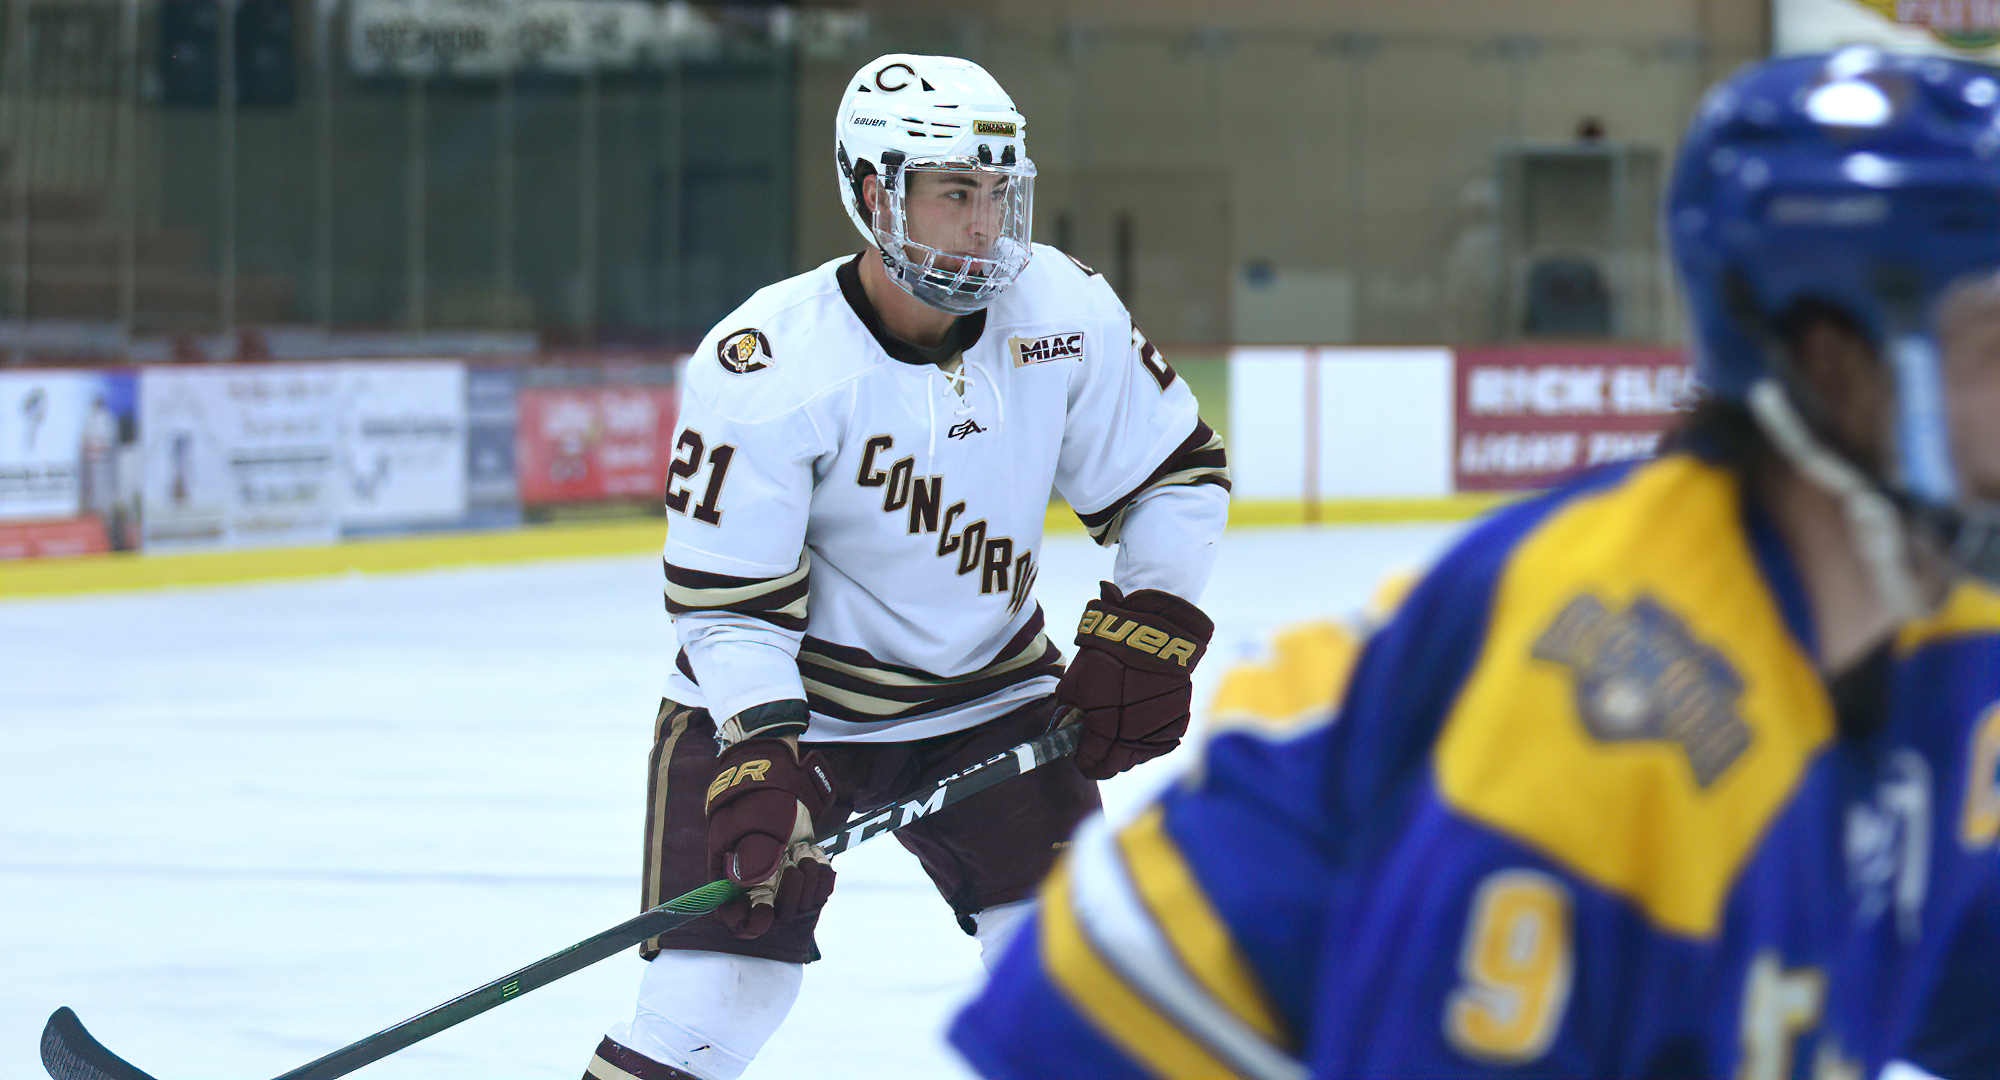 Senior defenseman Jaret Lalli picked up his team-leading ninth assist in the Cobbers' series opener at St. Scholastica.